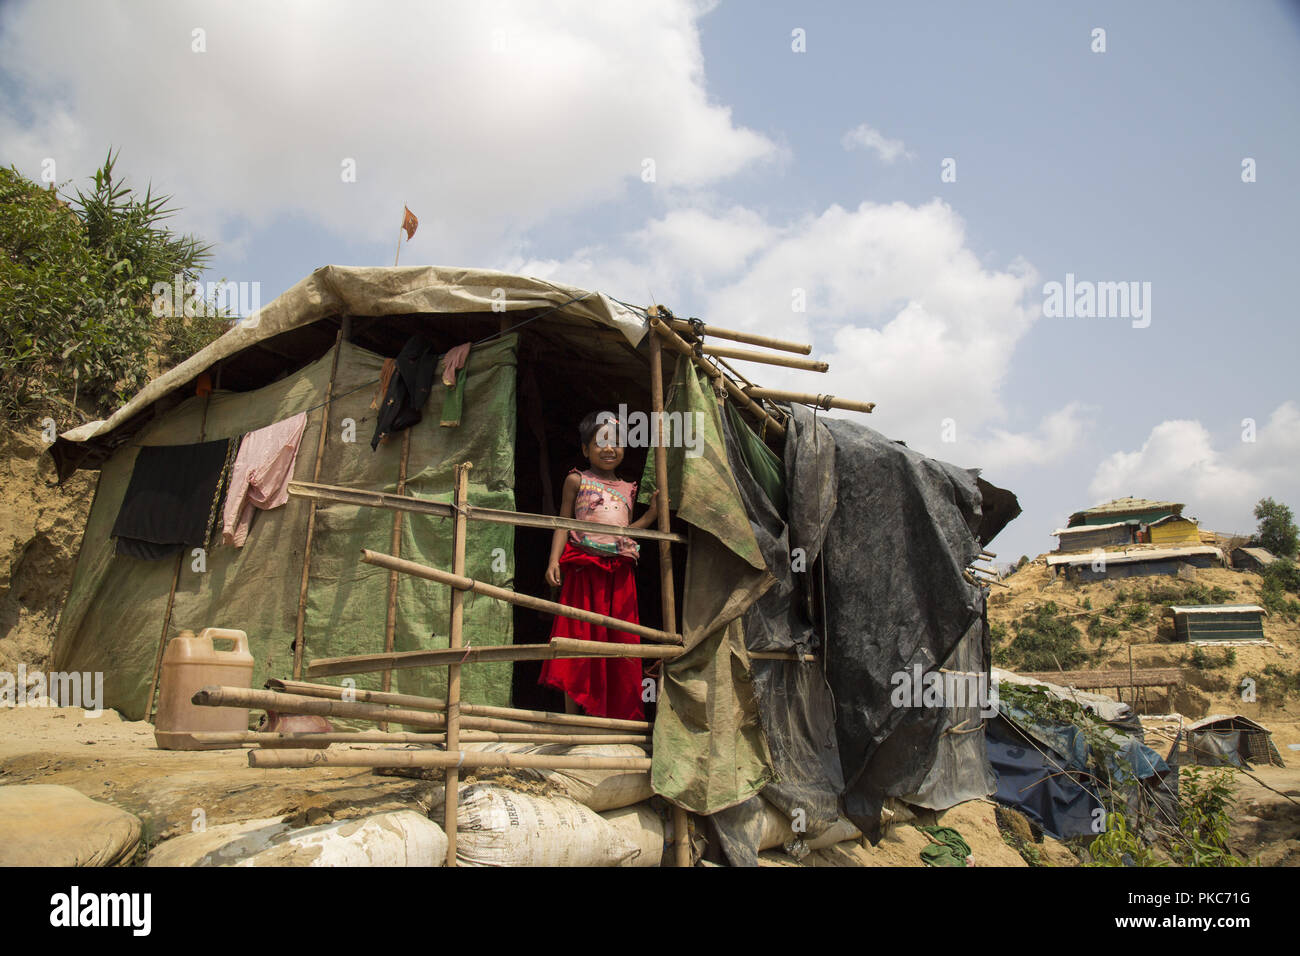 May 18, 2018 - Cox's Bazar, Bangladesh - A Rohingya refugee girl stands inside a shelter at a refugee camp in Cox's Bazar. In the Rohingya refugee camps of southern Bangladesh, where flimsy bamboo shelters sprawl across the steep hillsides and flood prone valleys, there has been a desperate effort to get ready for the coming cyclone and monsoon season. Credit: Zakir Hossain Chowdhury/ZUMA Wire/Alamy Live News Stock Photo